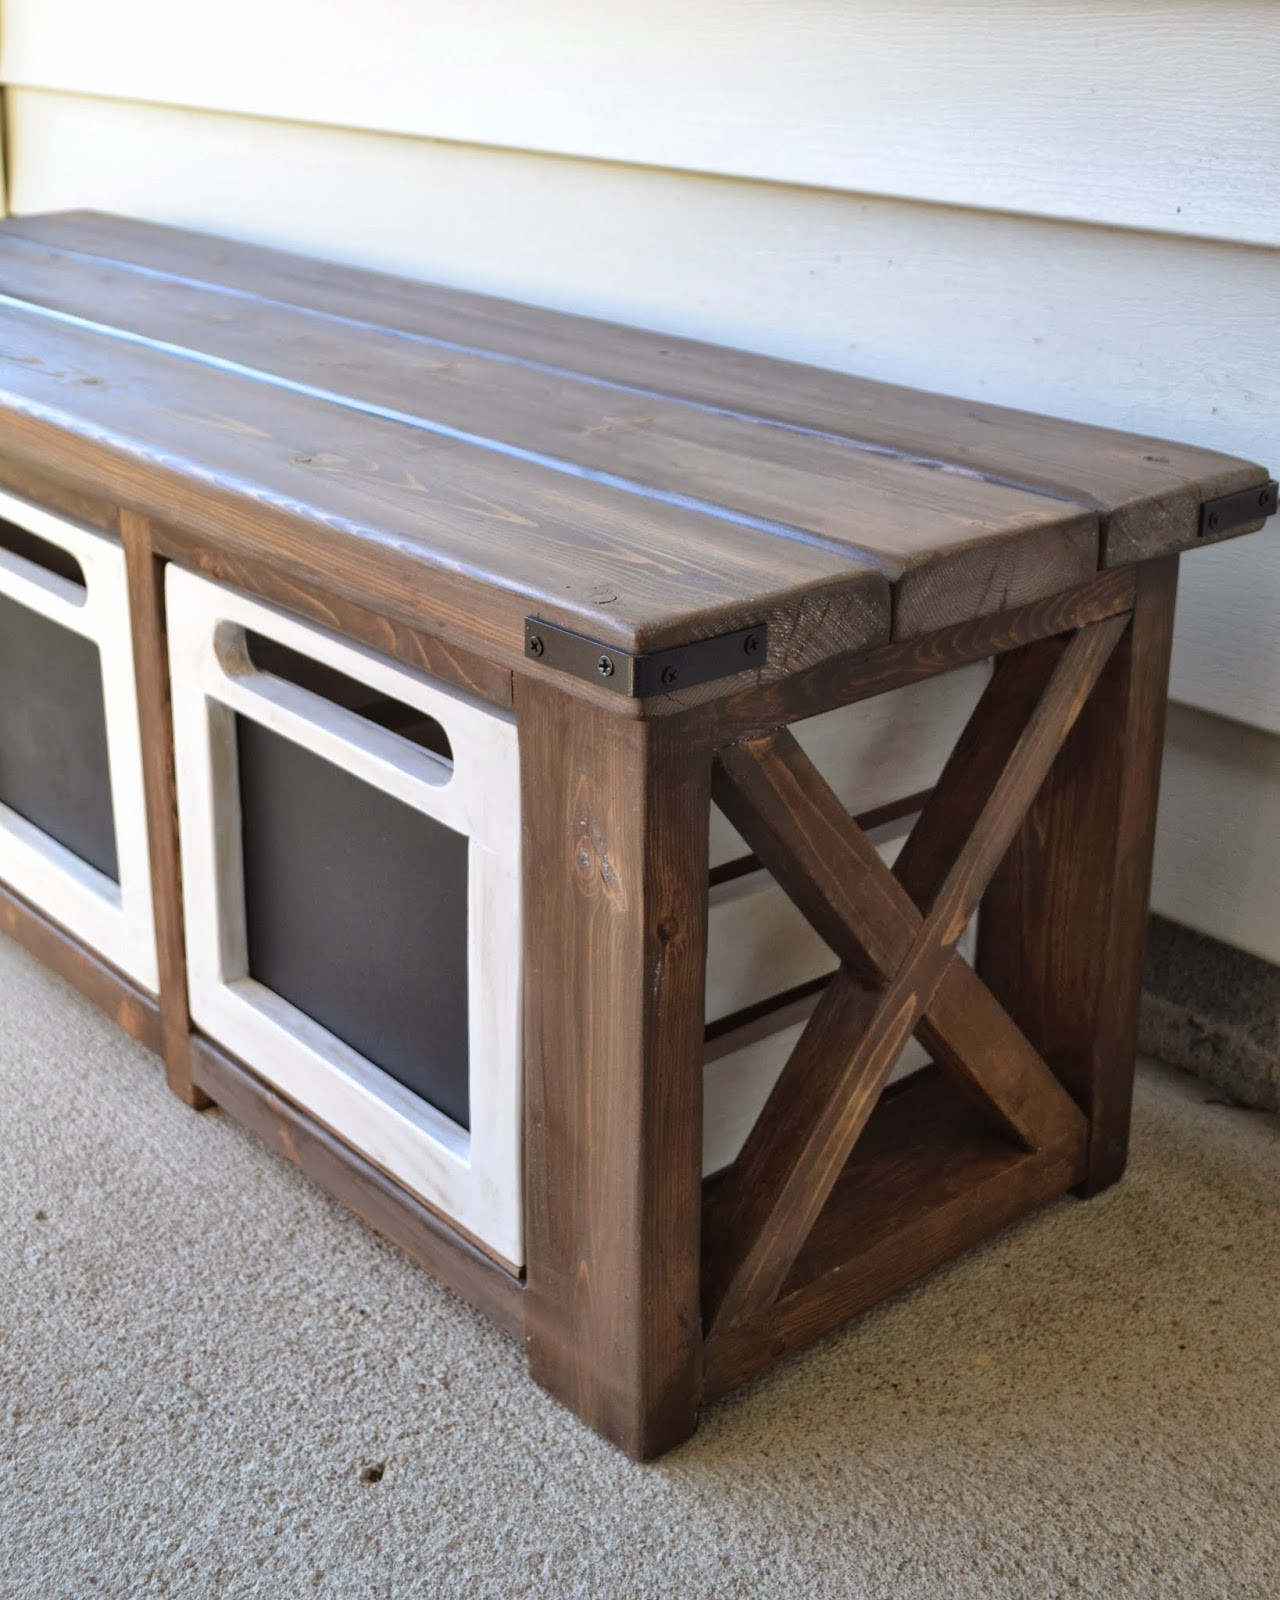 Entryway Bench With Shoe Storage
 The Domestic Doozie Custom Entryway Bench with Chalkboard